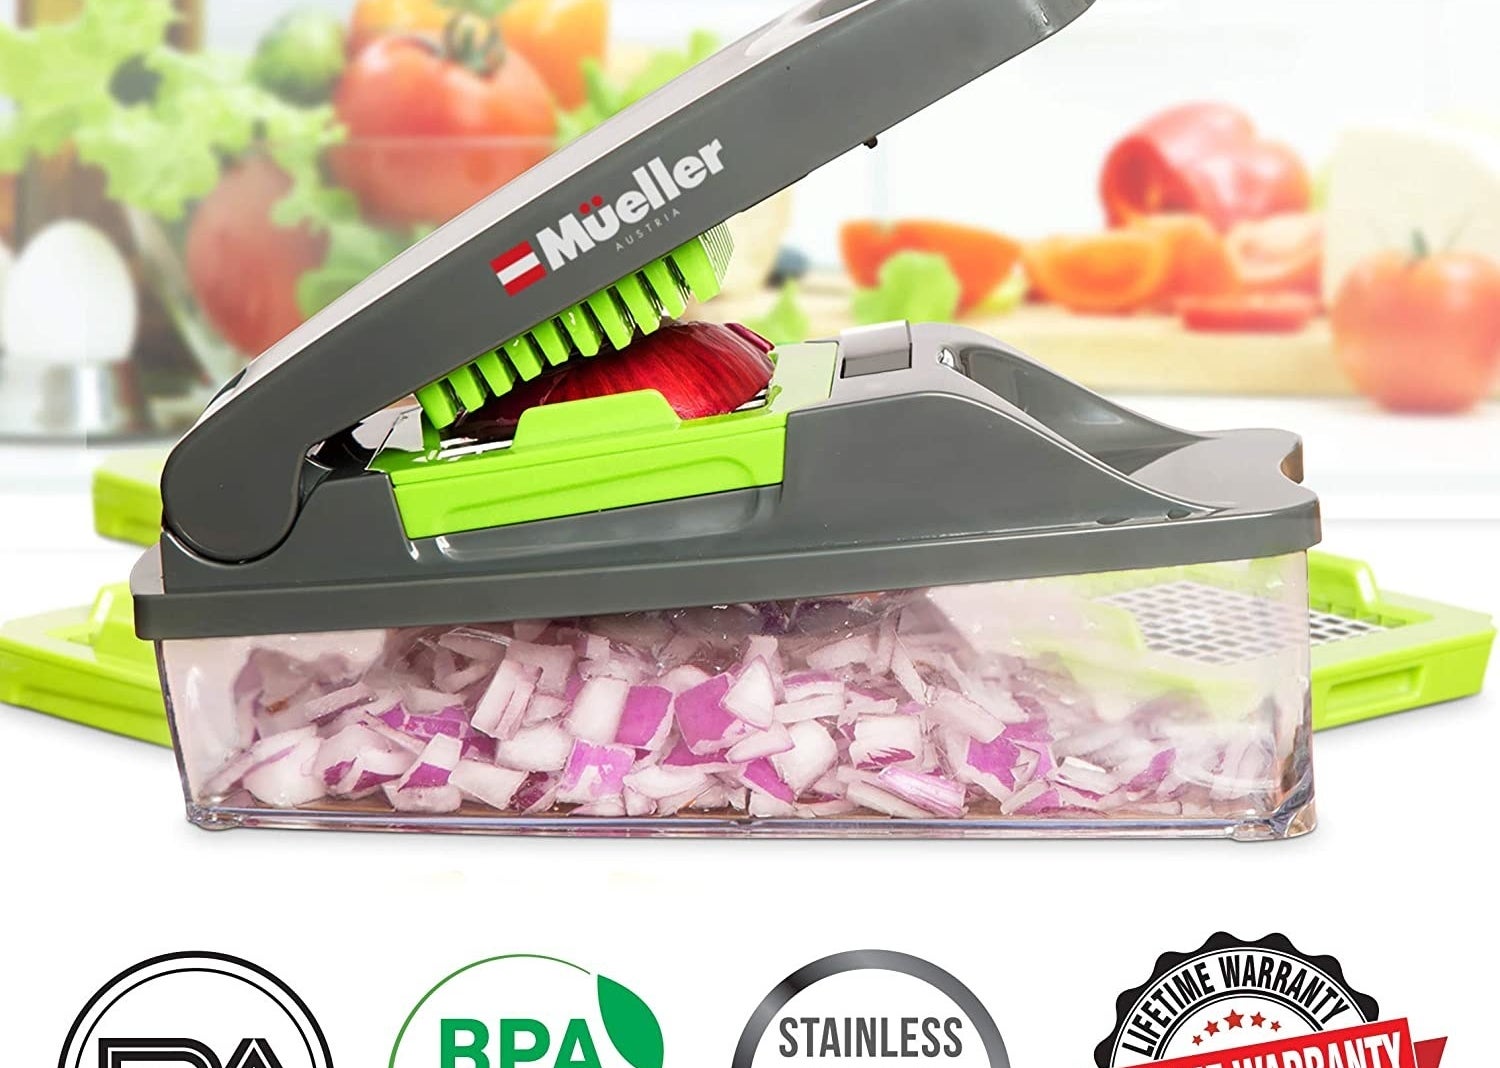 a rectangular chopper in which you place the vegetable in the top and the pieces go into a plastic container underneath